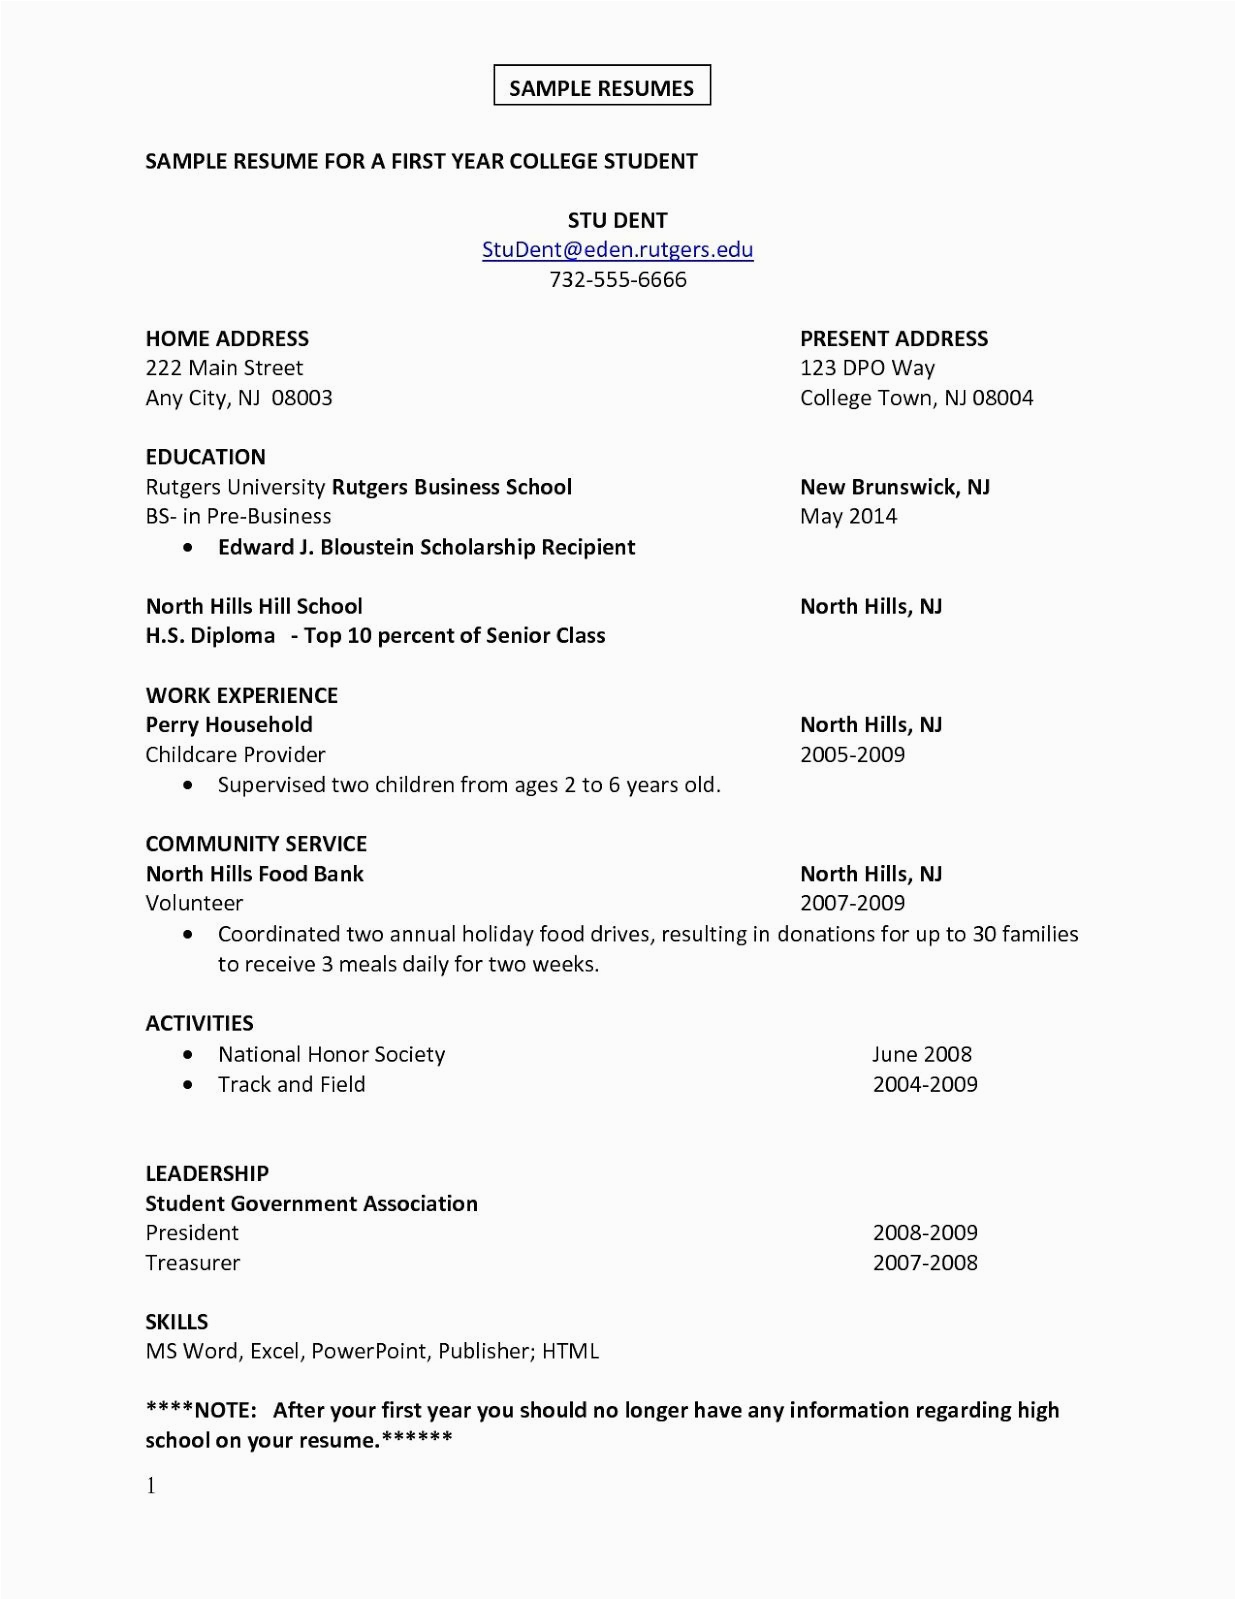 Resume for First Job for Students Sample First Job Sample Resume Sample Resumes